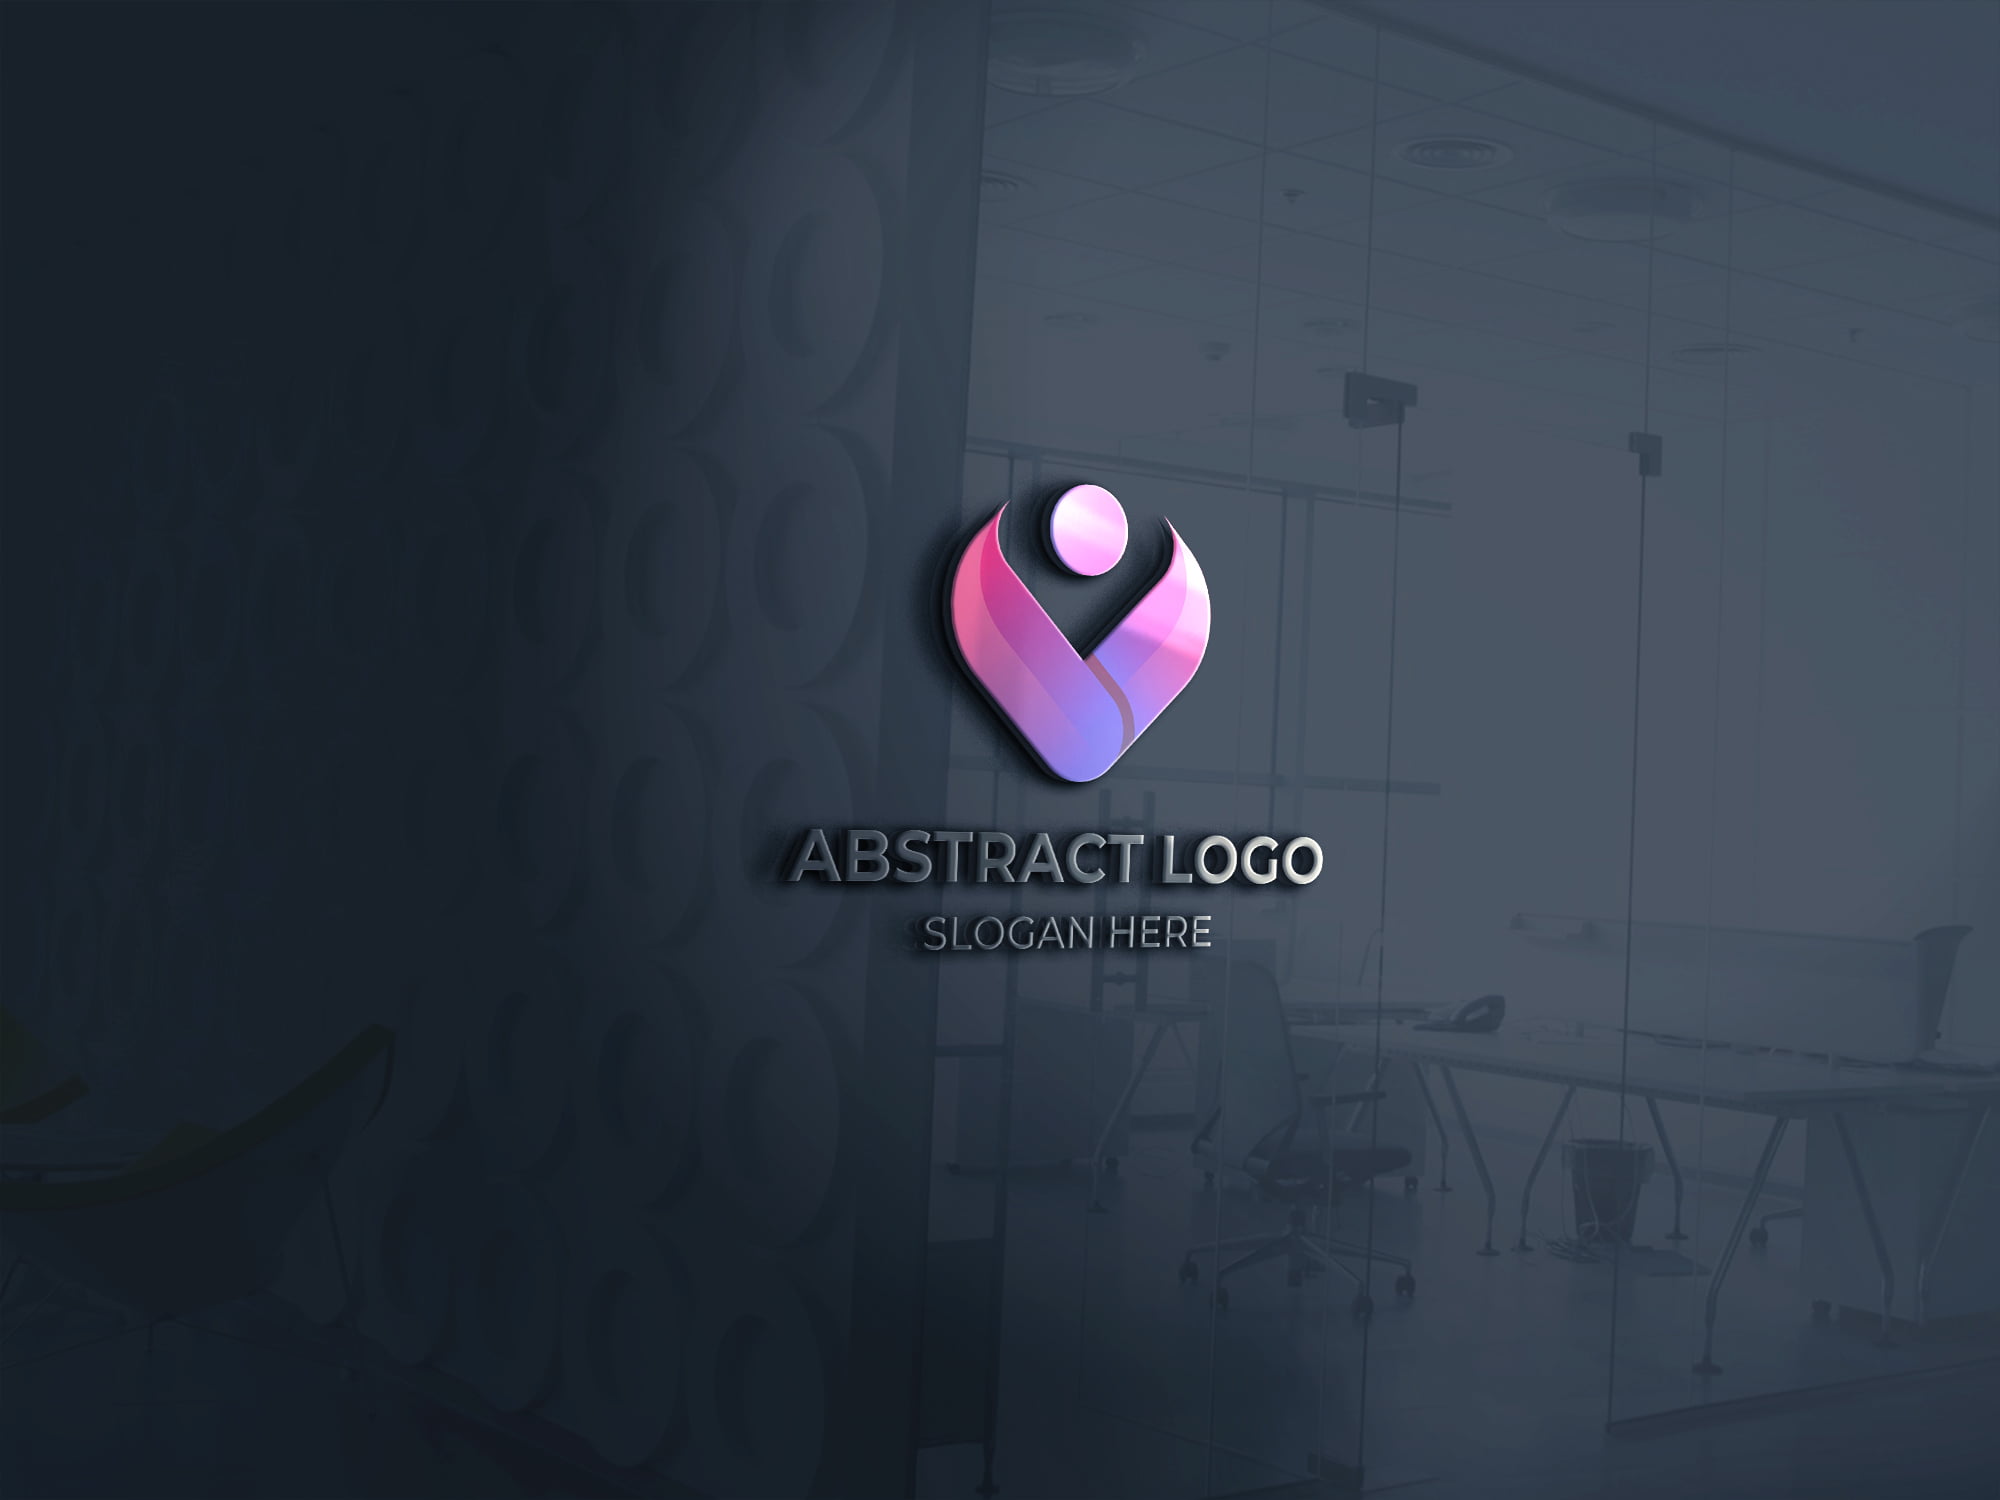 3d glass abstract logo